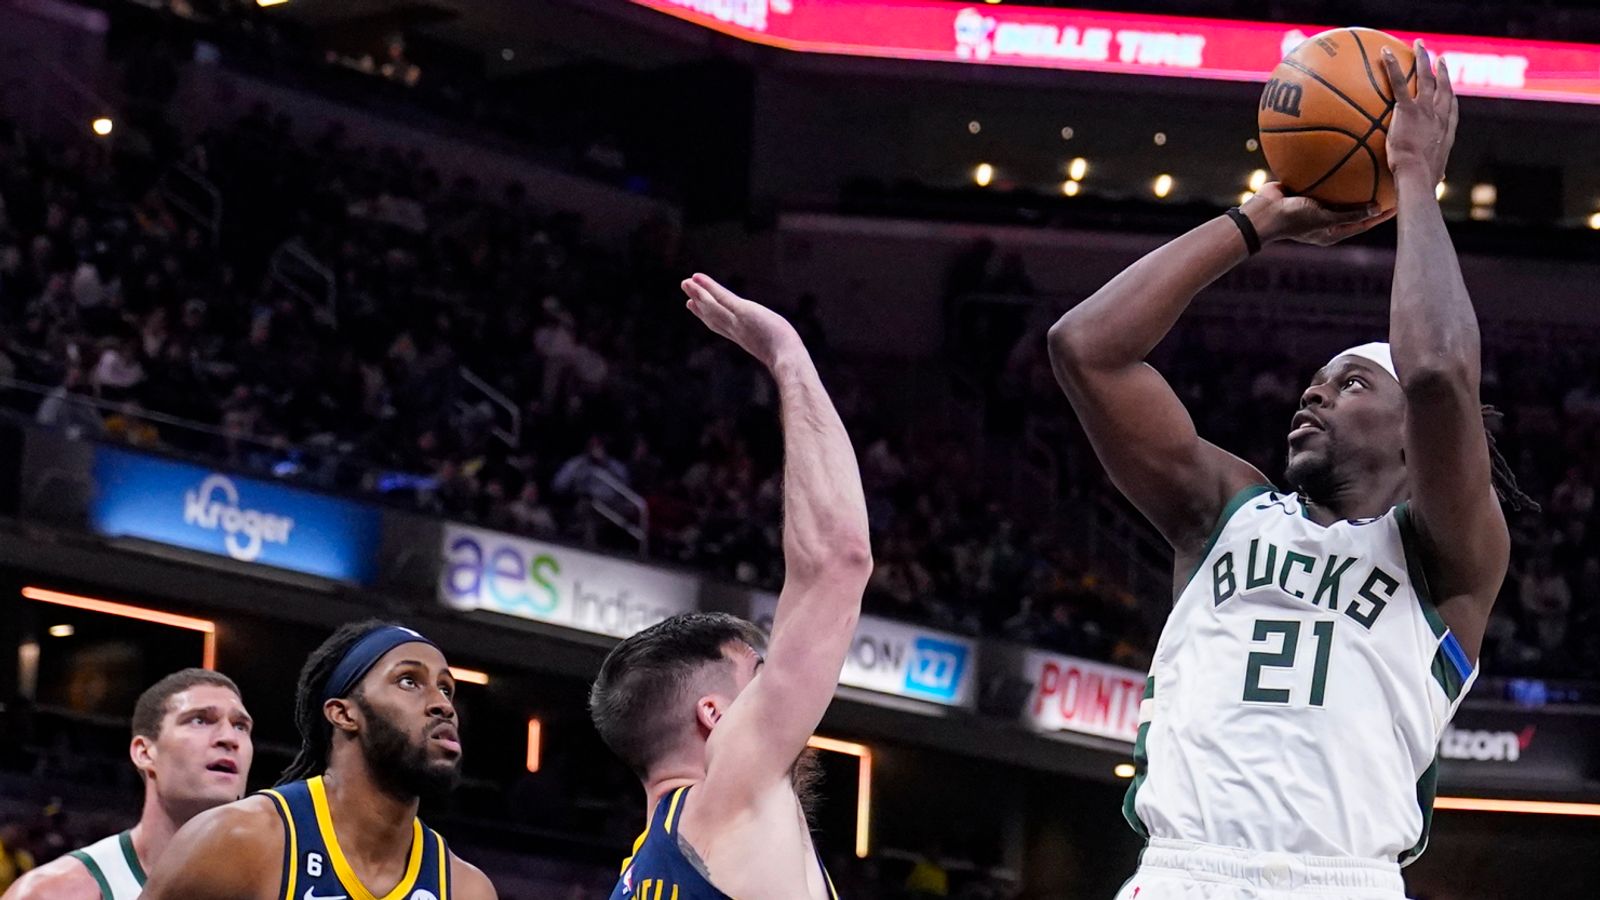 Mathurin hits 2 late free throws, Indiana Pacers edge Boston